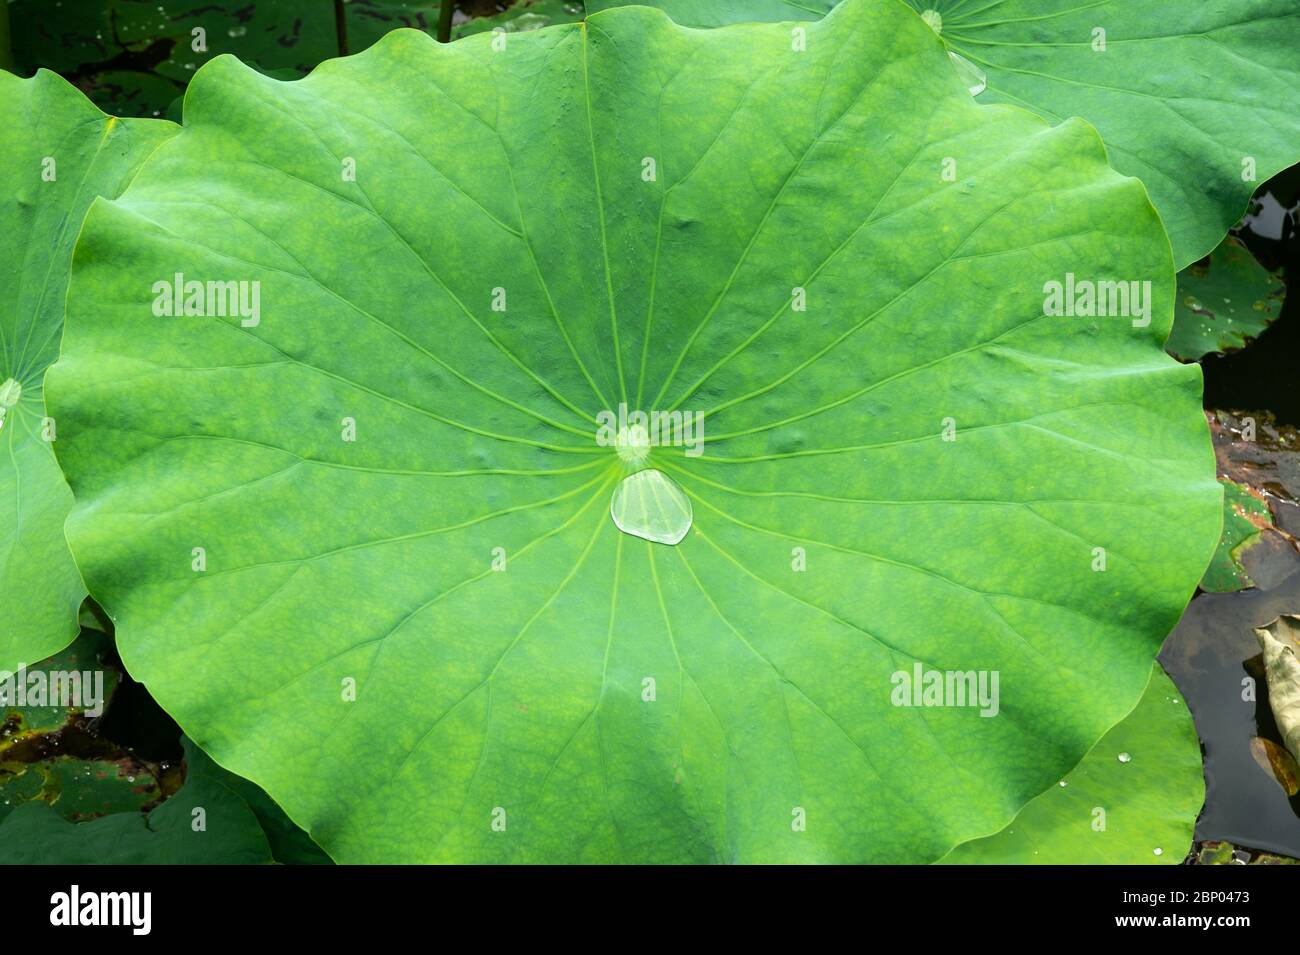 Nelumbo nucifera, also known as a lotus plant, collects dew and rain water in its bowl-shaped leaves. Stock Photo